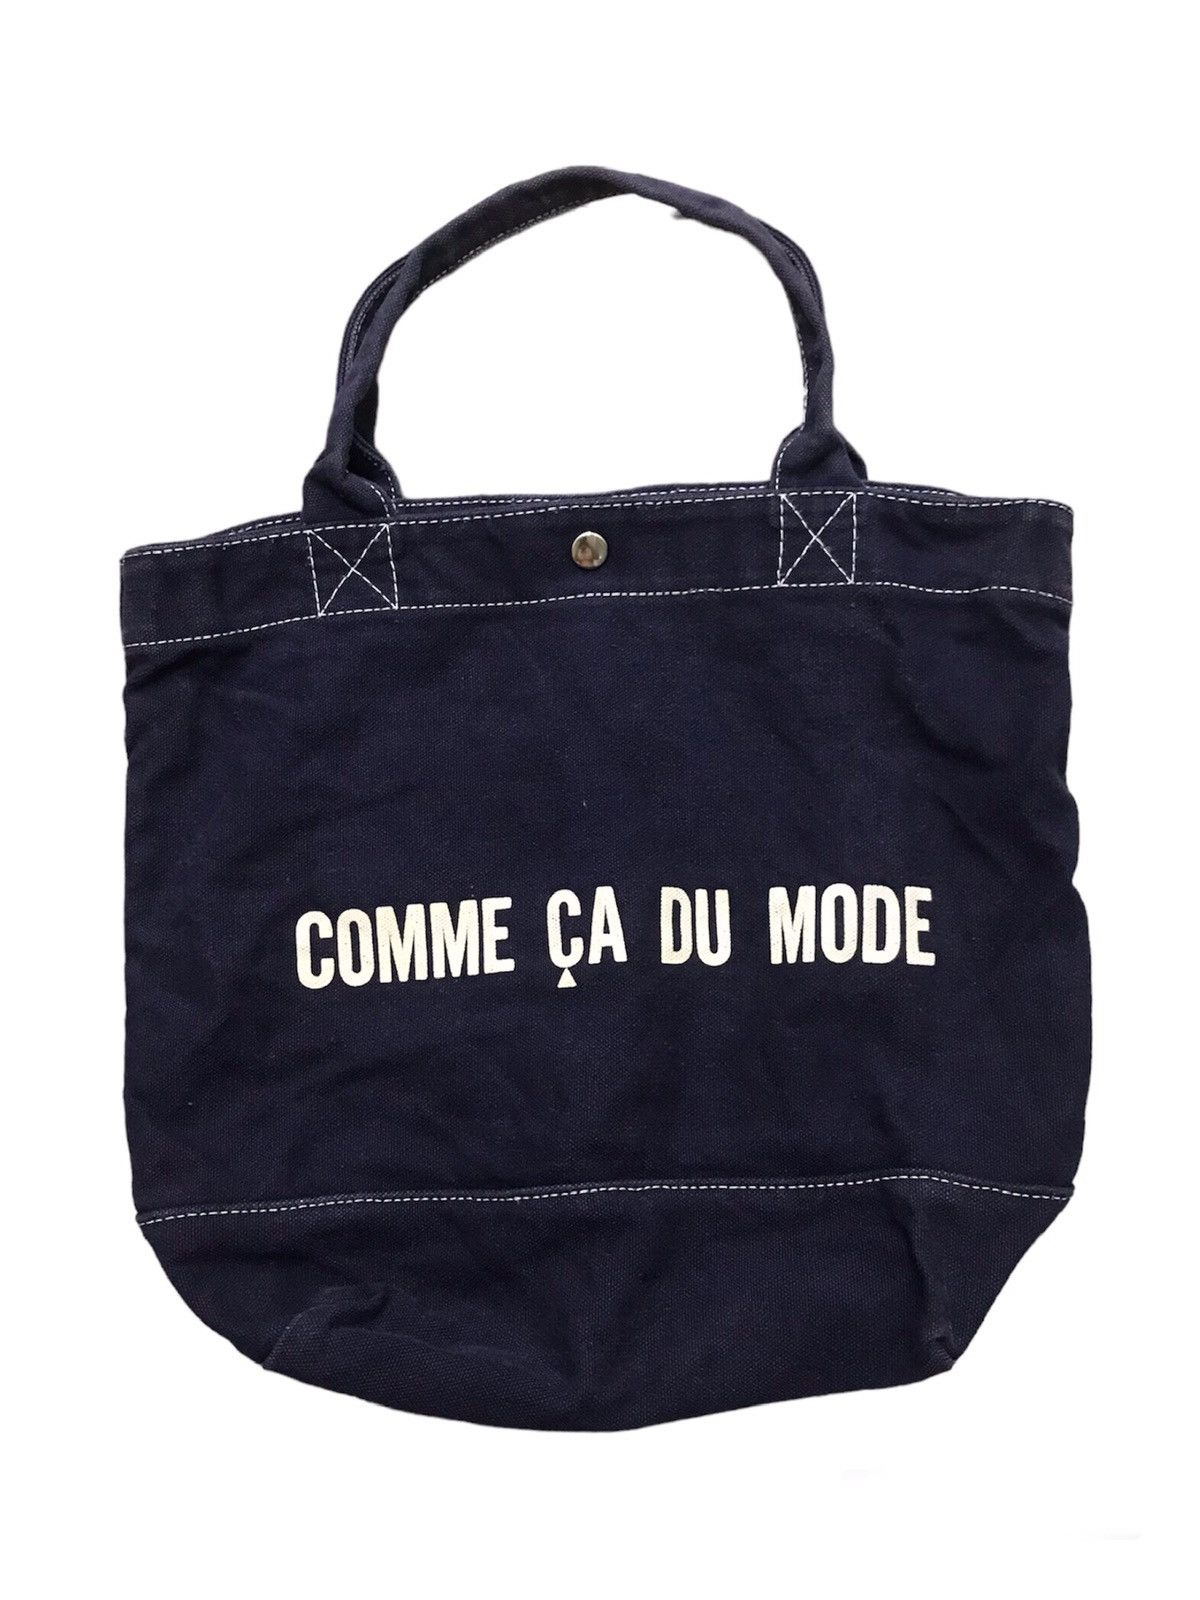 Comme Ca Ism - Japanese Comme Ca Du Mode Designer Style Tote Bag